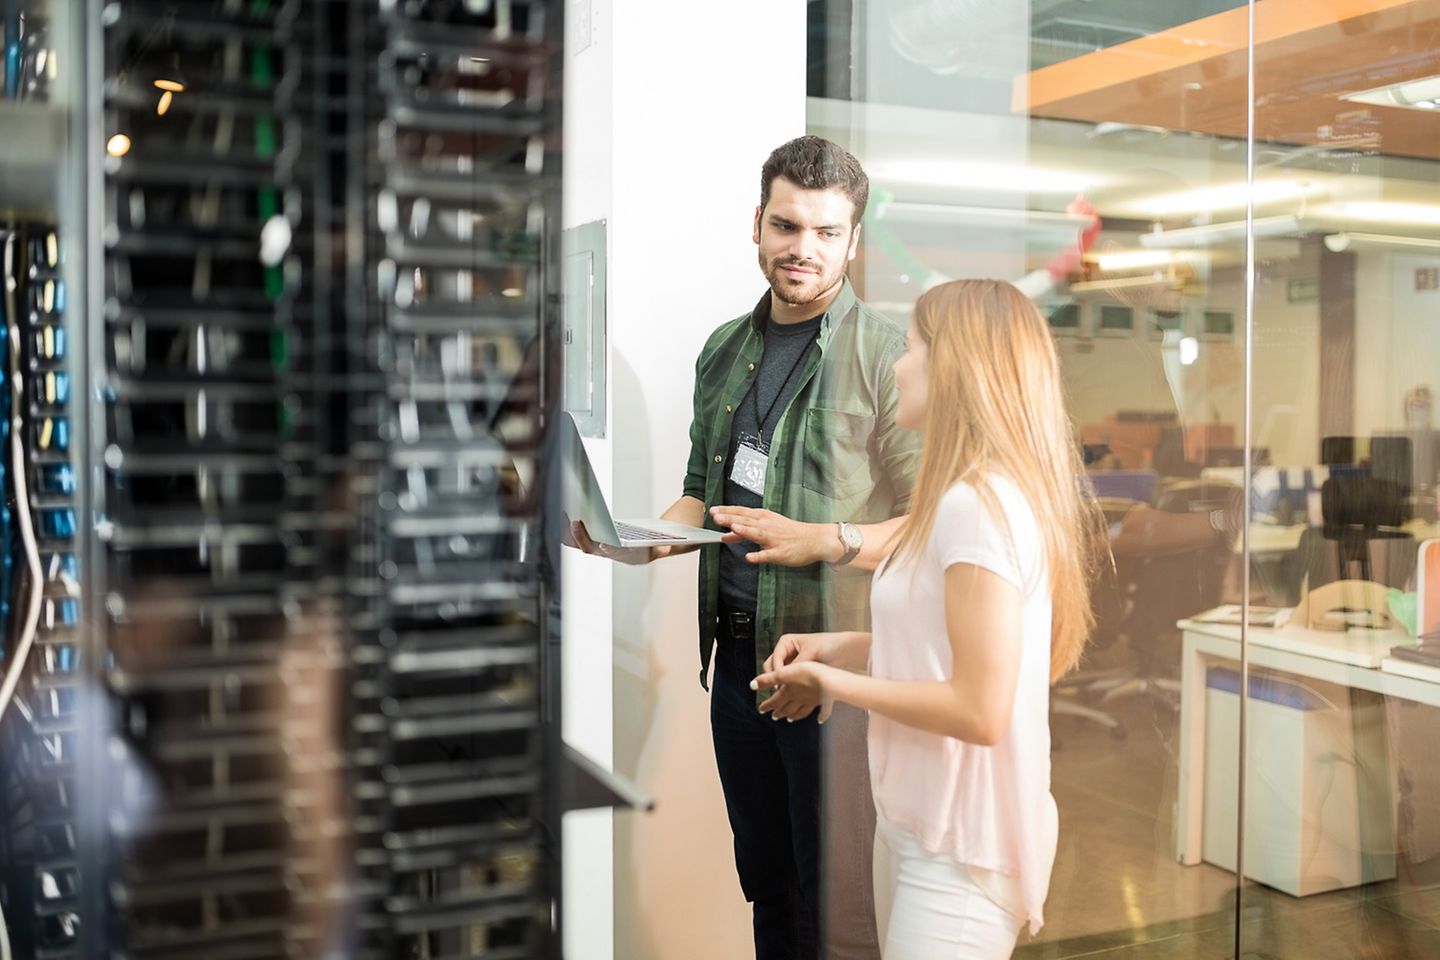 Colleagues having a discussion in a server room at the office